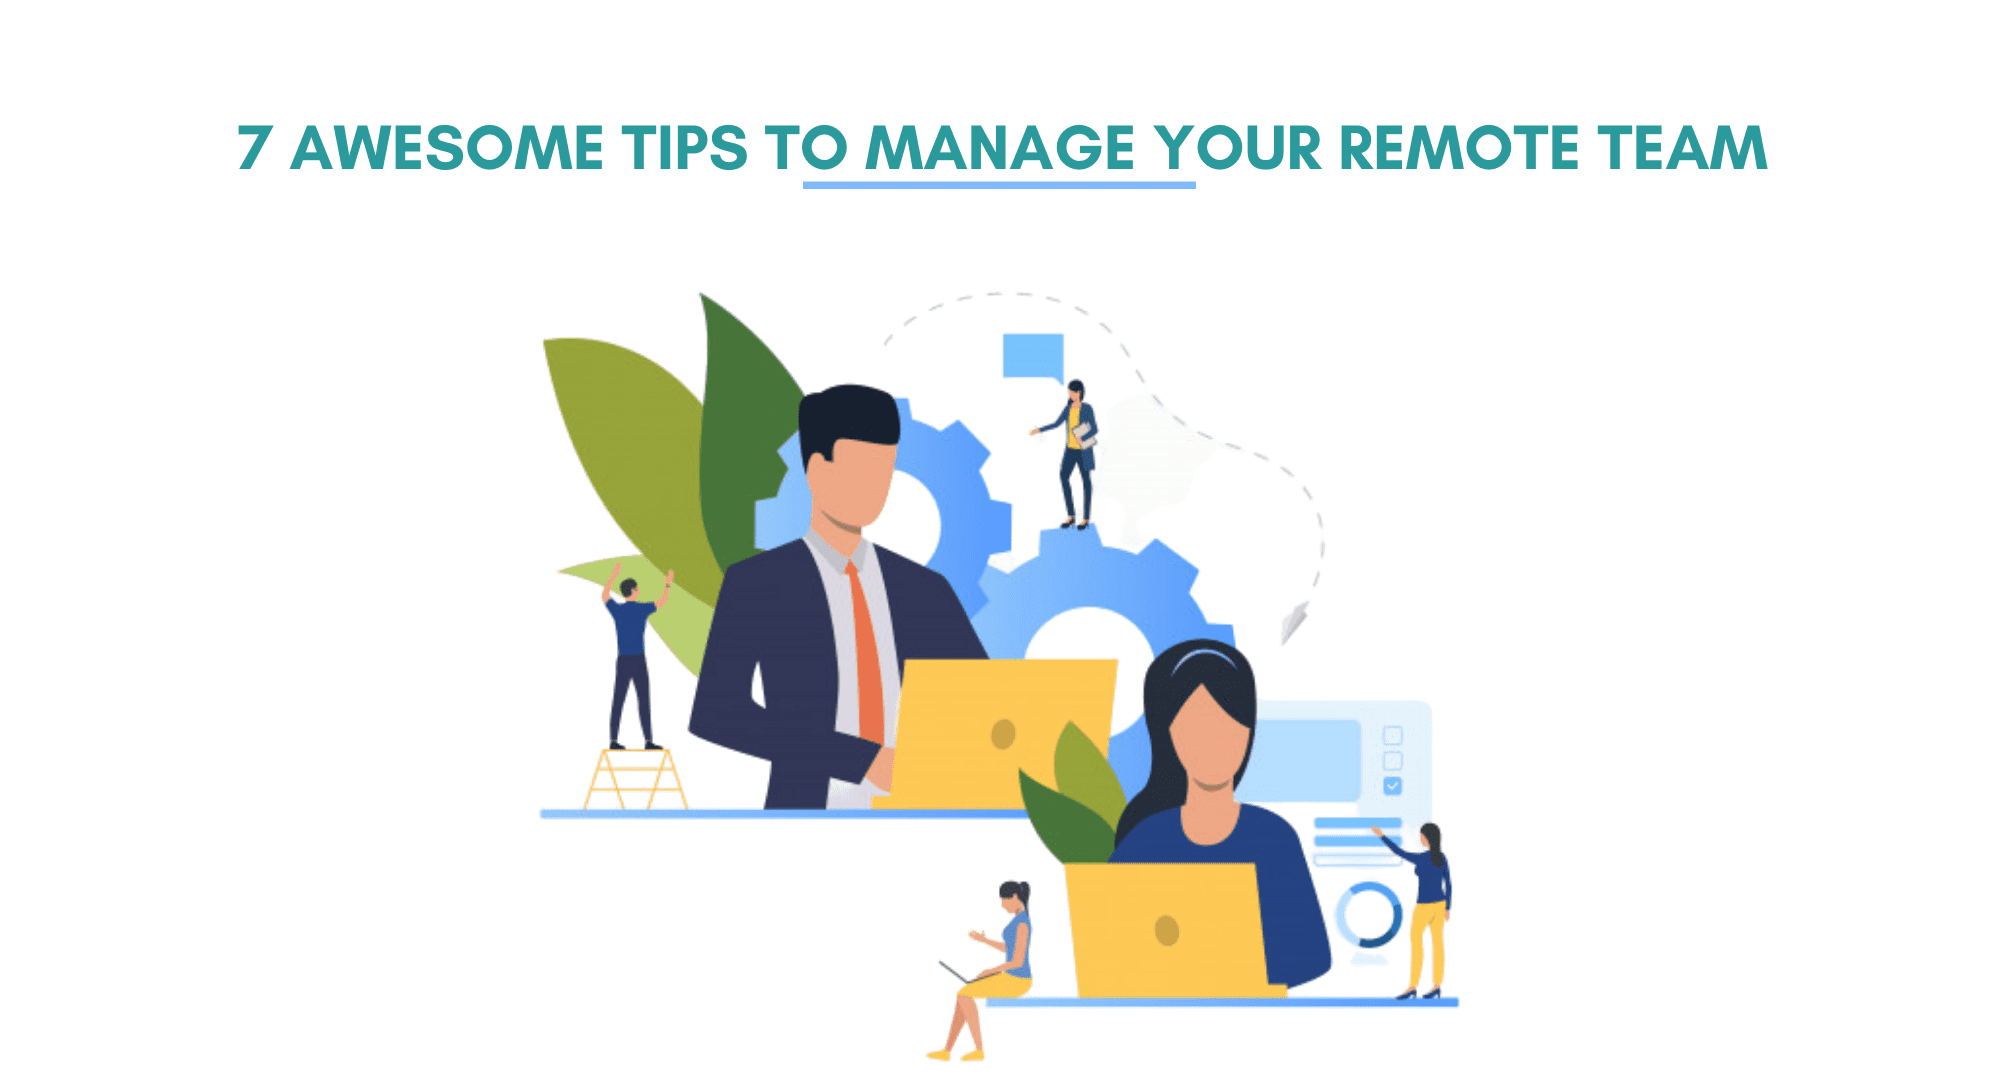 Top tips for managing remote teams. 7 awesome tips to manage remote teams. 7 Ways to Effectively Manage Your Remote Team. 7 tips for managing remote employees. How to manage remote employees